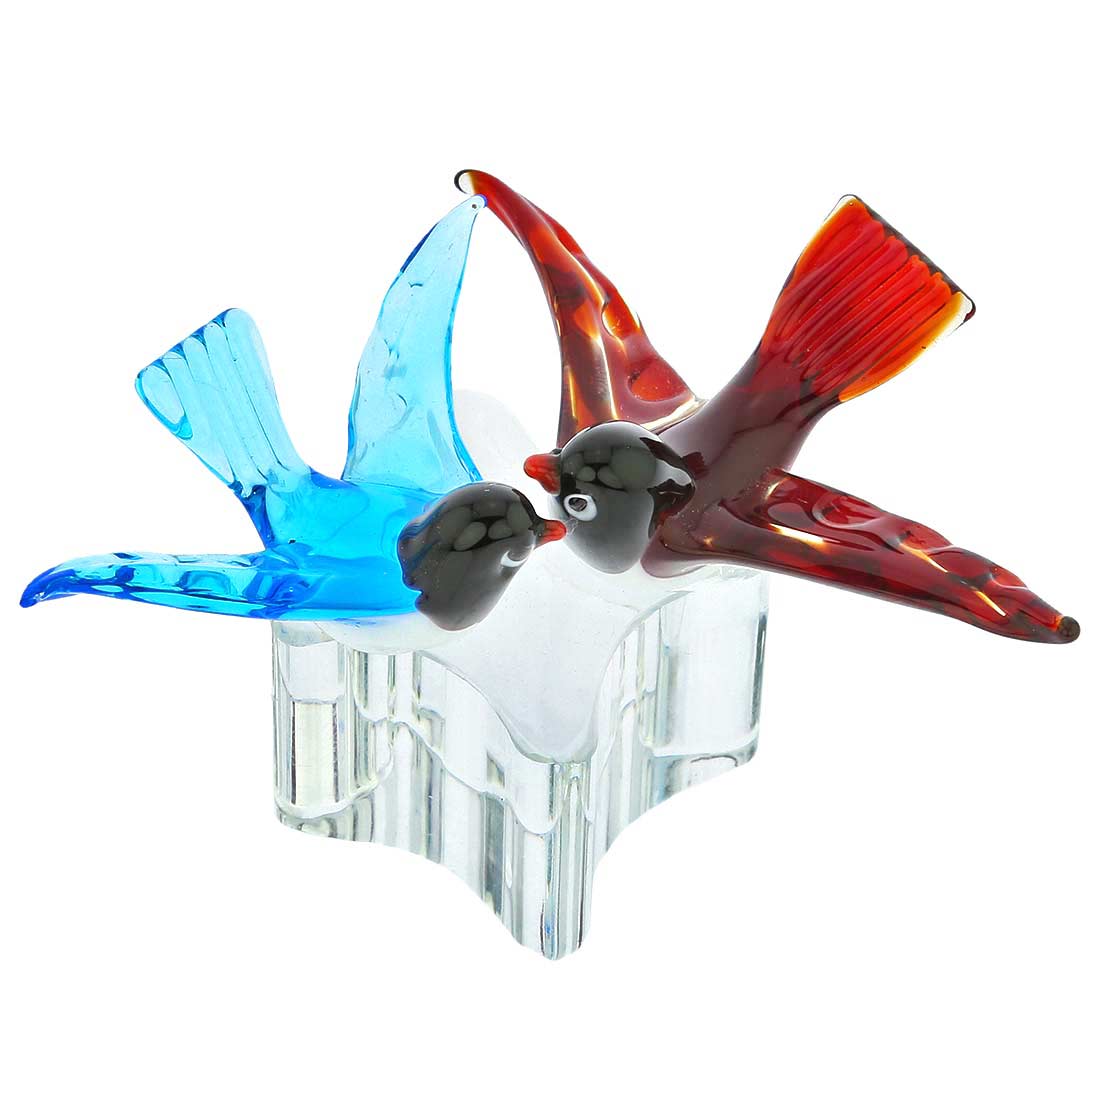 Murano Glass Love Birds - Red and Blue